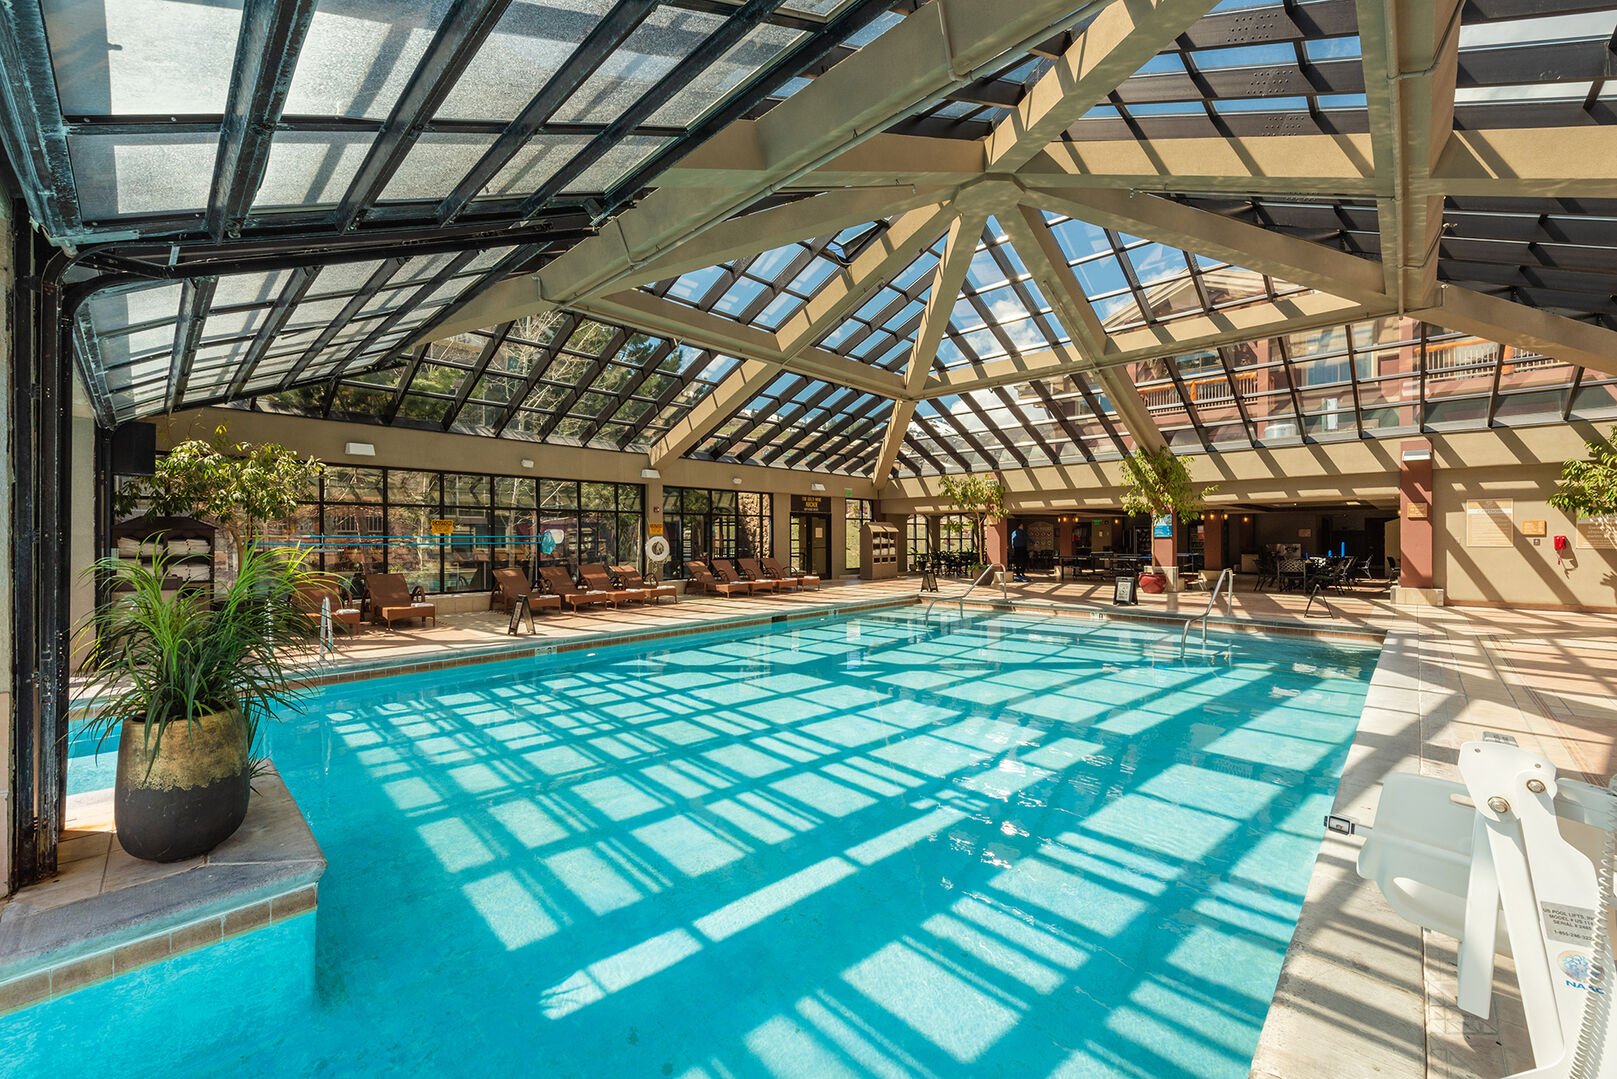 Main indoor/outdoor pool nicely heated year round